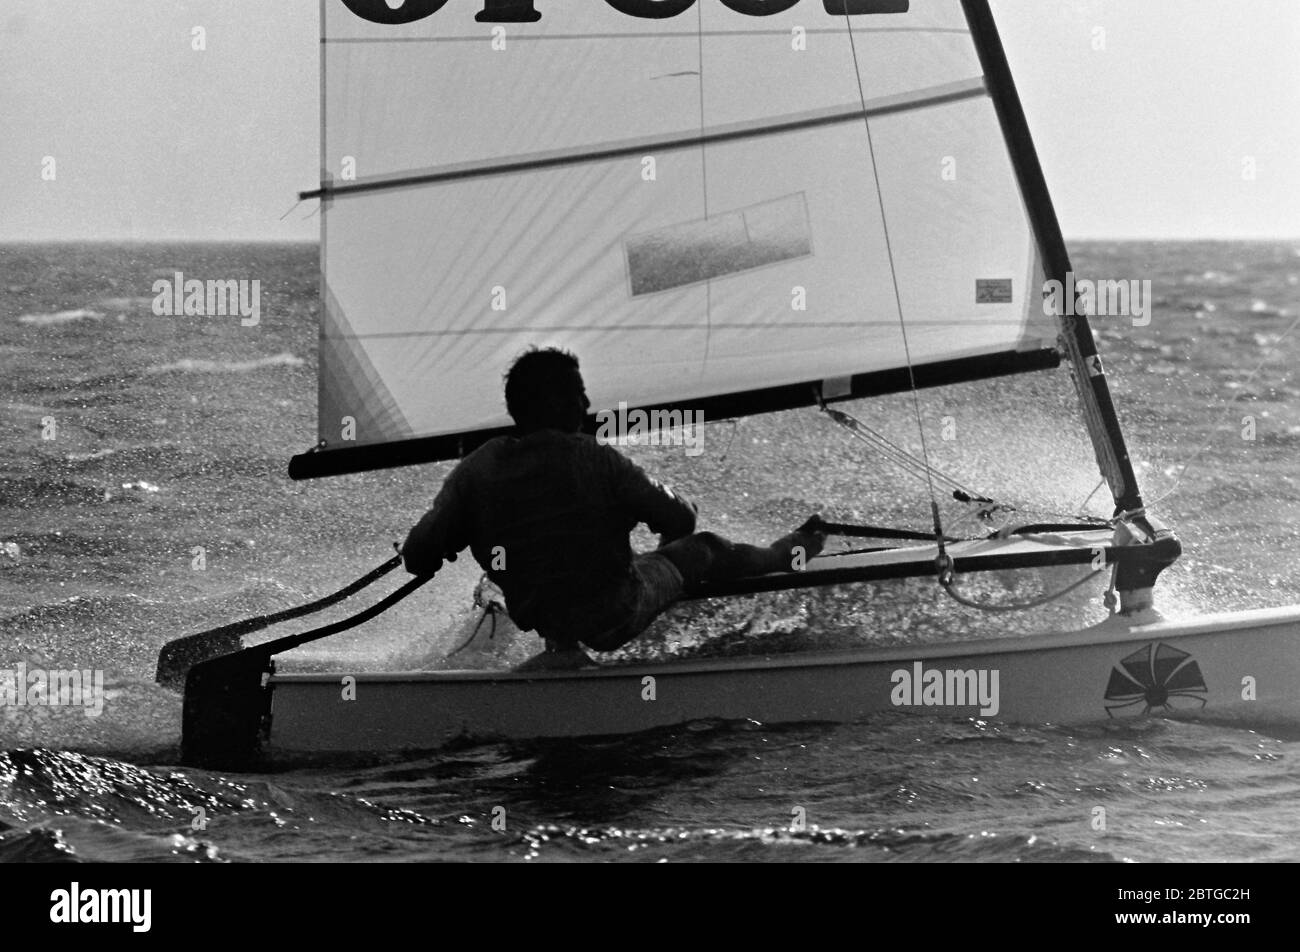 AJAXNETPHOTO. 1977. LAS SALINAS BAY, LANZAROTE, SPAIN. - A COMPETITOR RACING IN A STIFF BREEZE AND CHOPPY WATERS IN THE HOBIE CAT 14 WORLD CHAMPIONSHIPS. PHOTO:JONATHAN EASTLAND/AJAX REF:7726091 34 Stock Photo